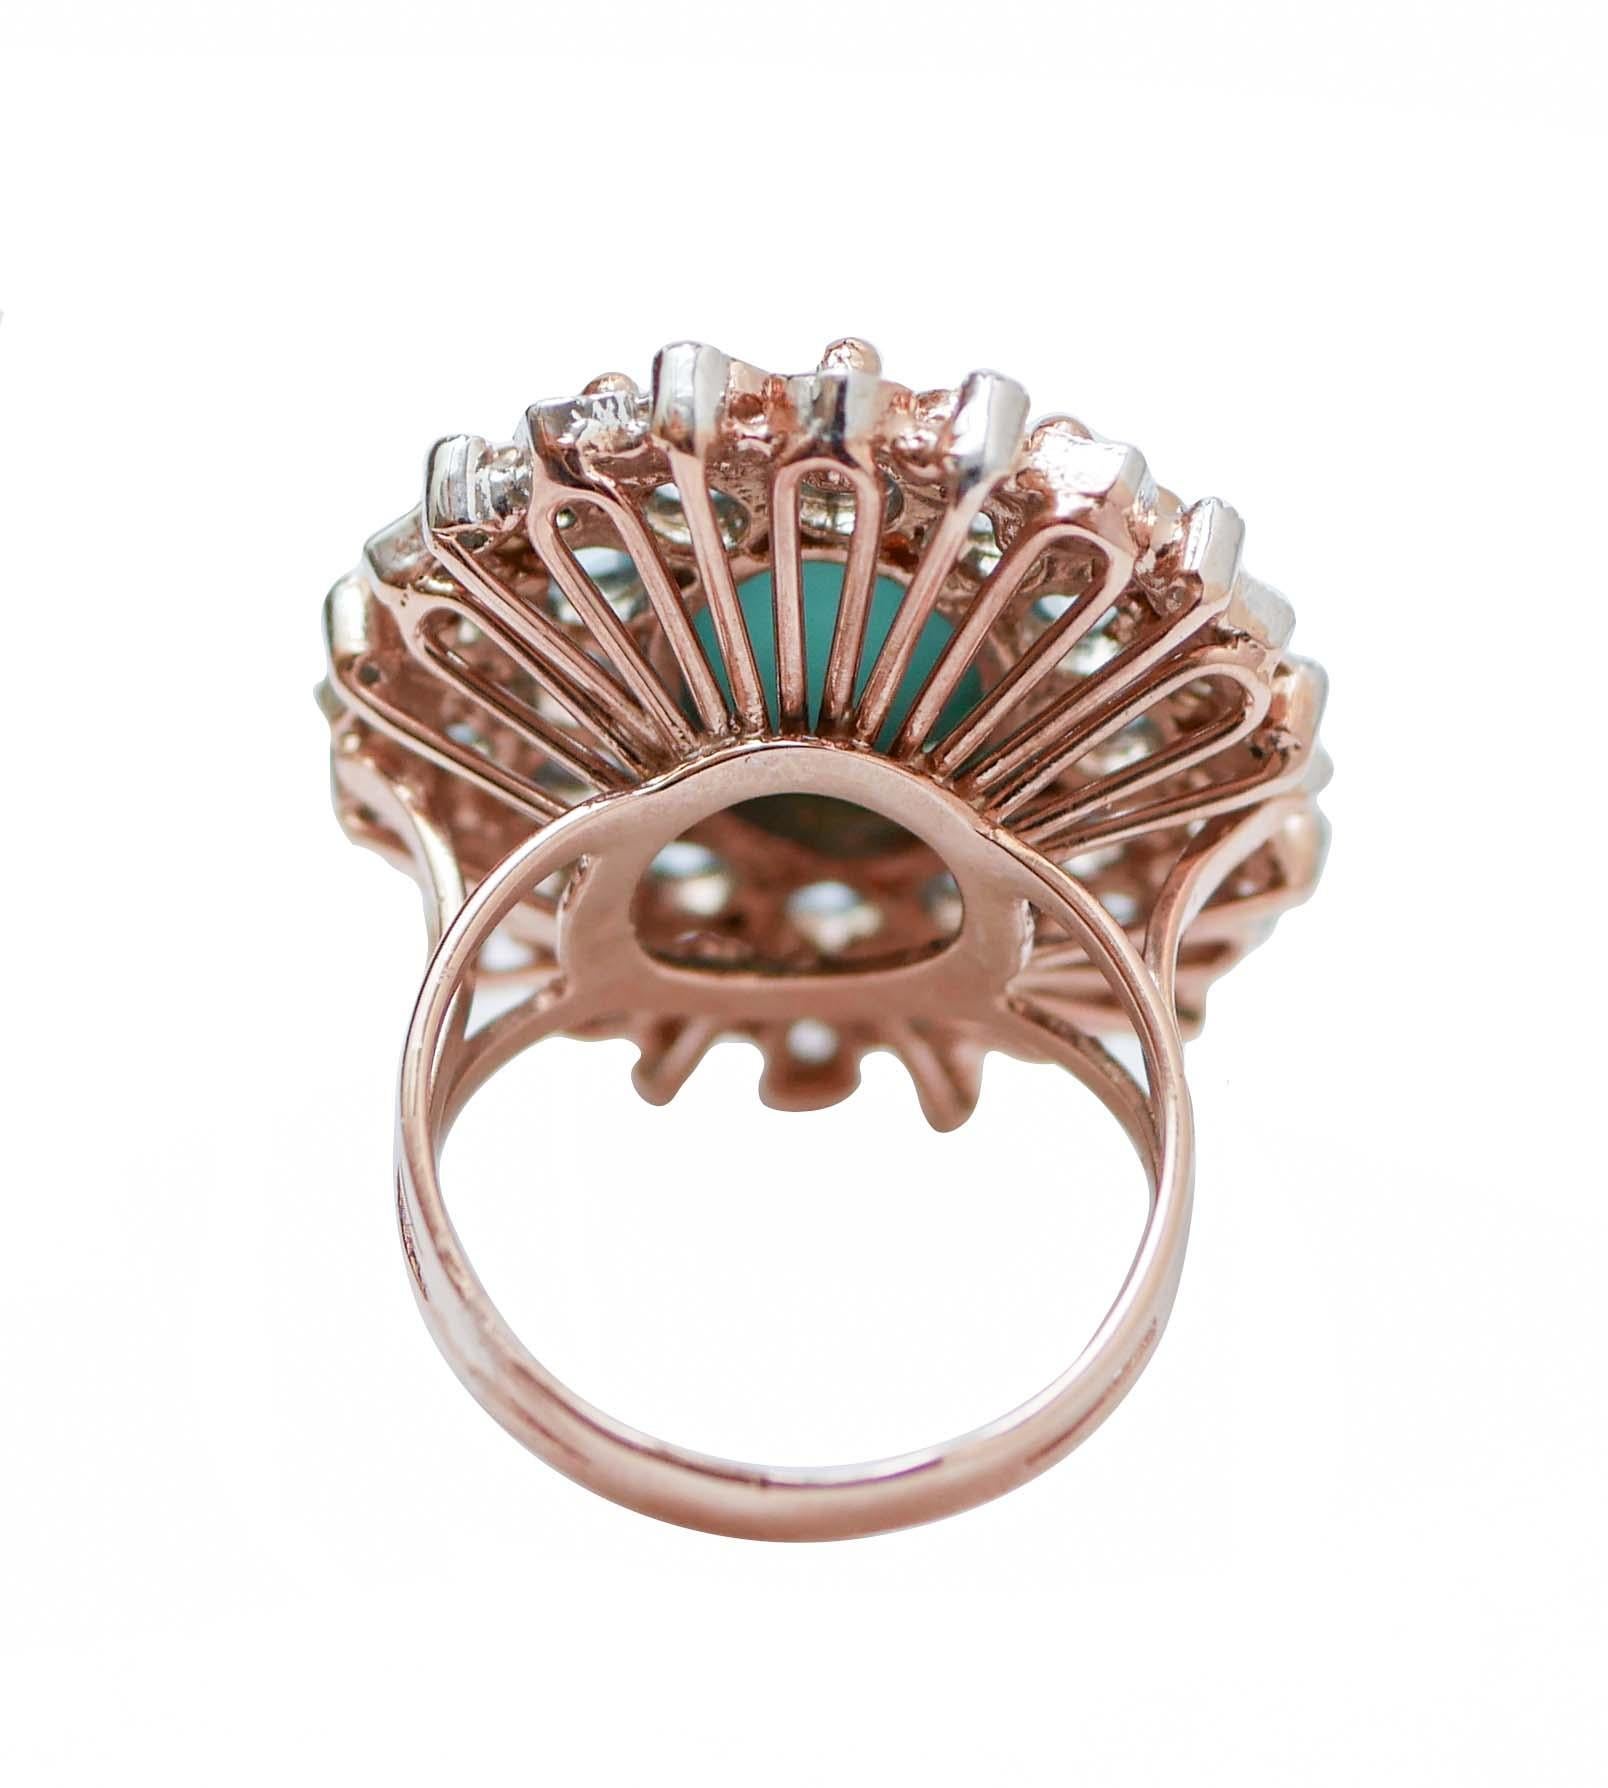 Retro Turquoise, Topazs, Diamonds, Rose Gold and Silver Ring. For Sale